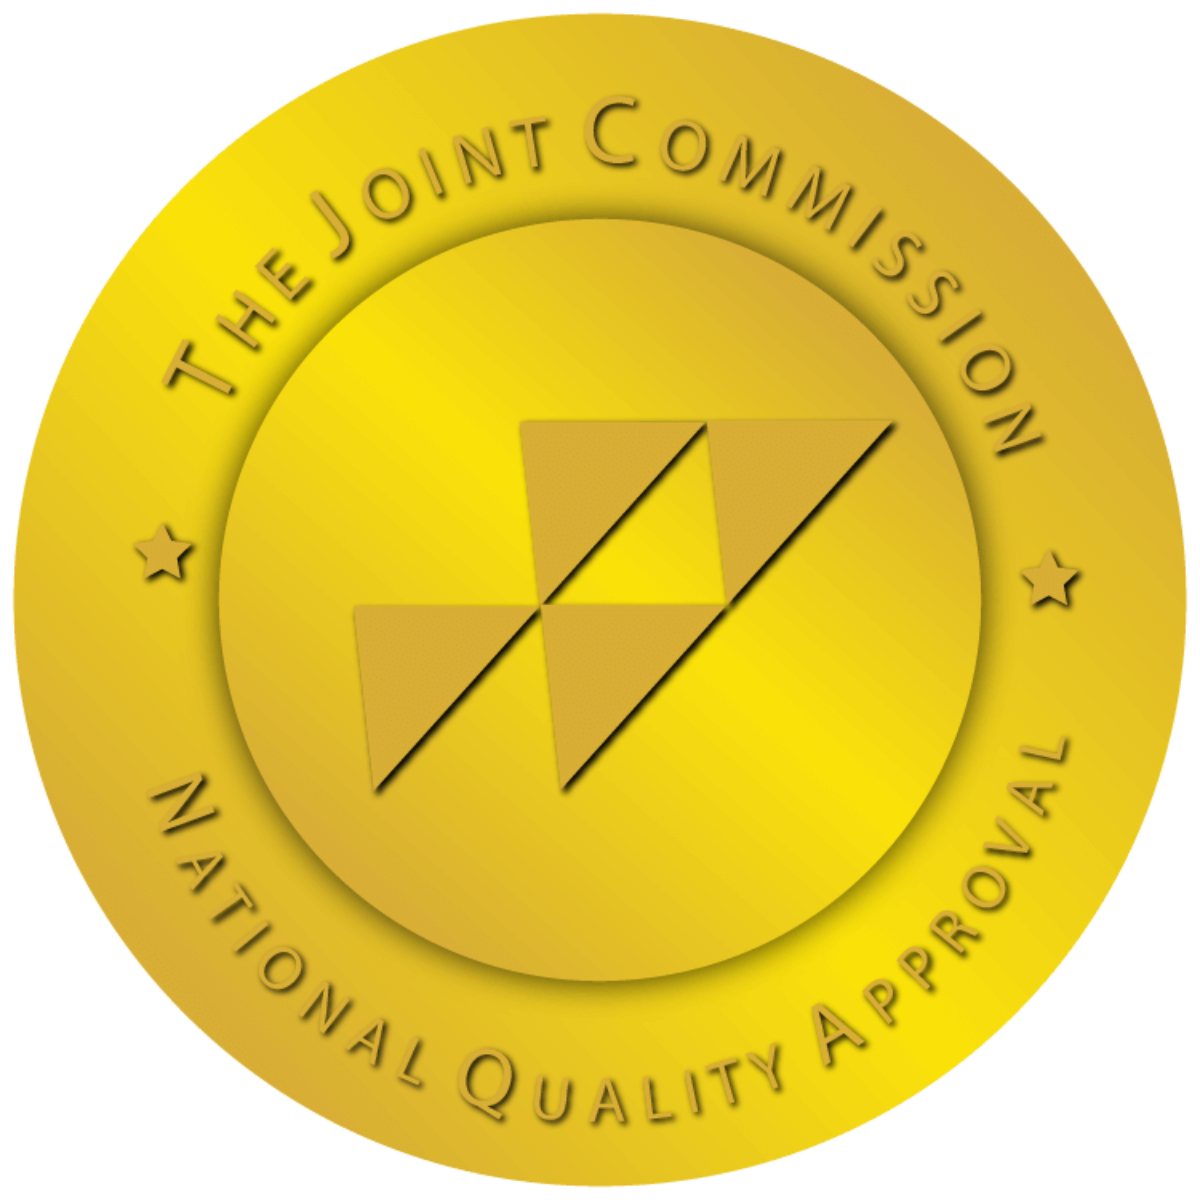 The Joint Commission accreditation seal